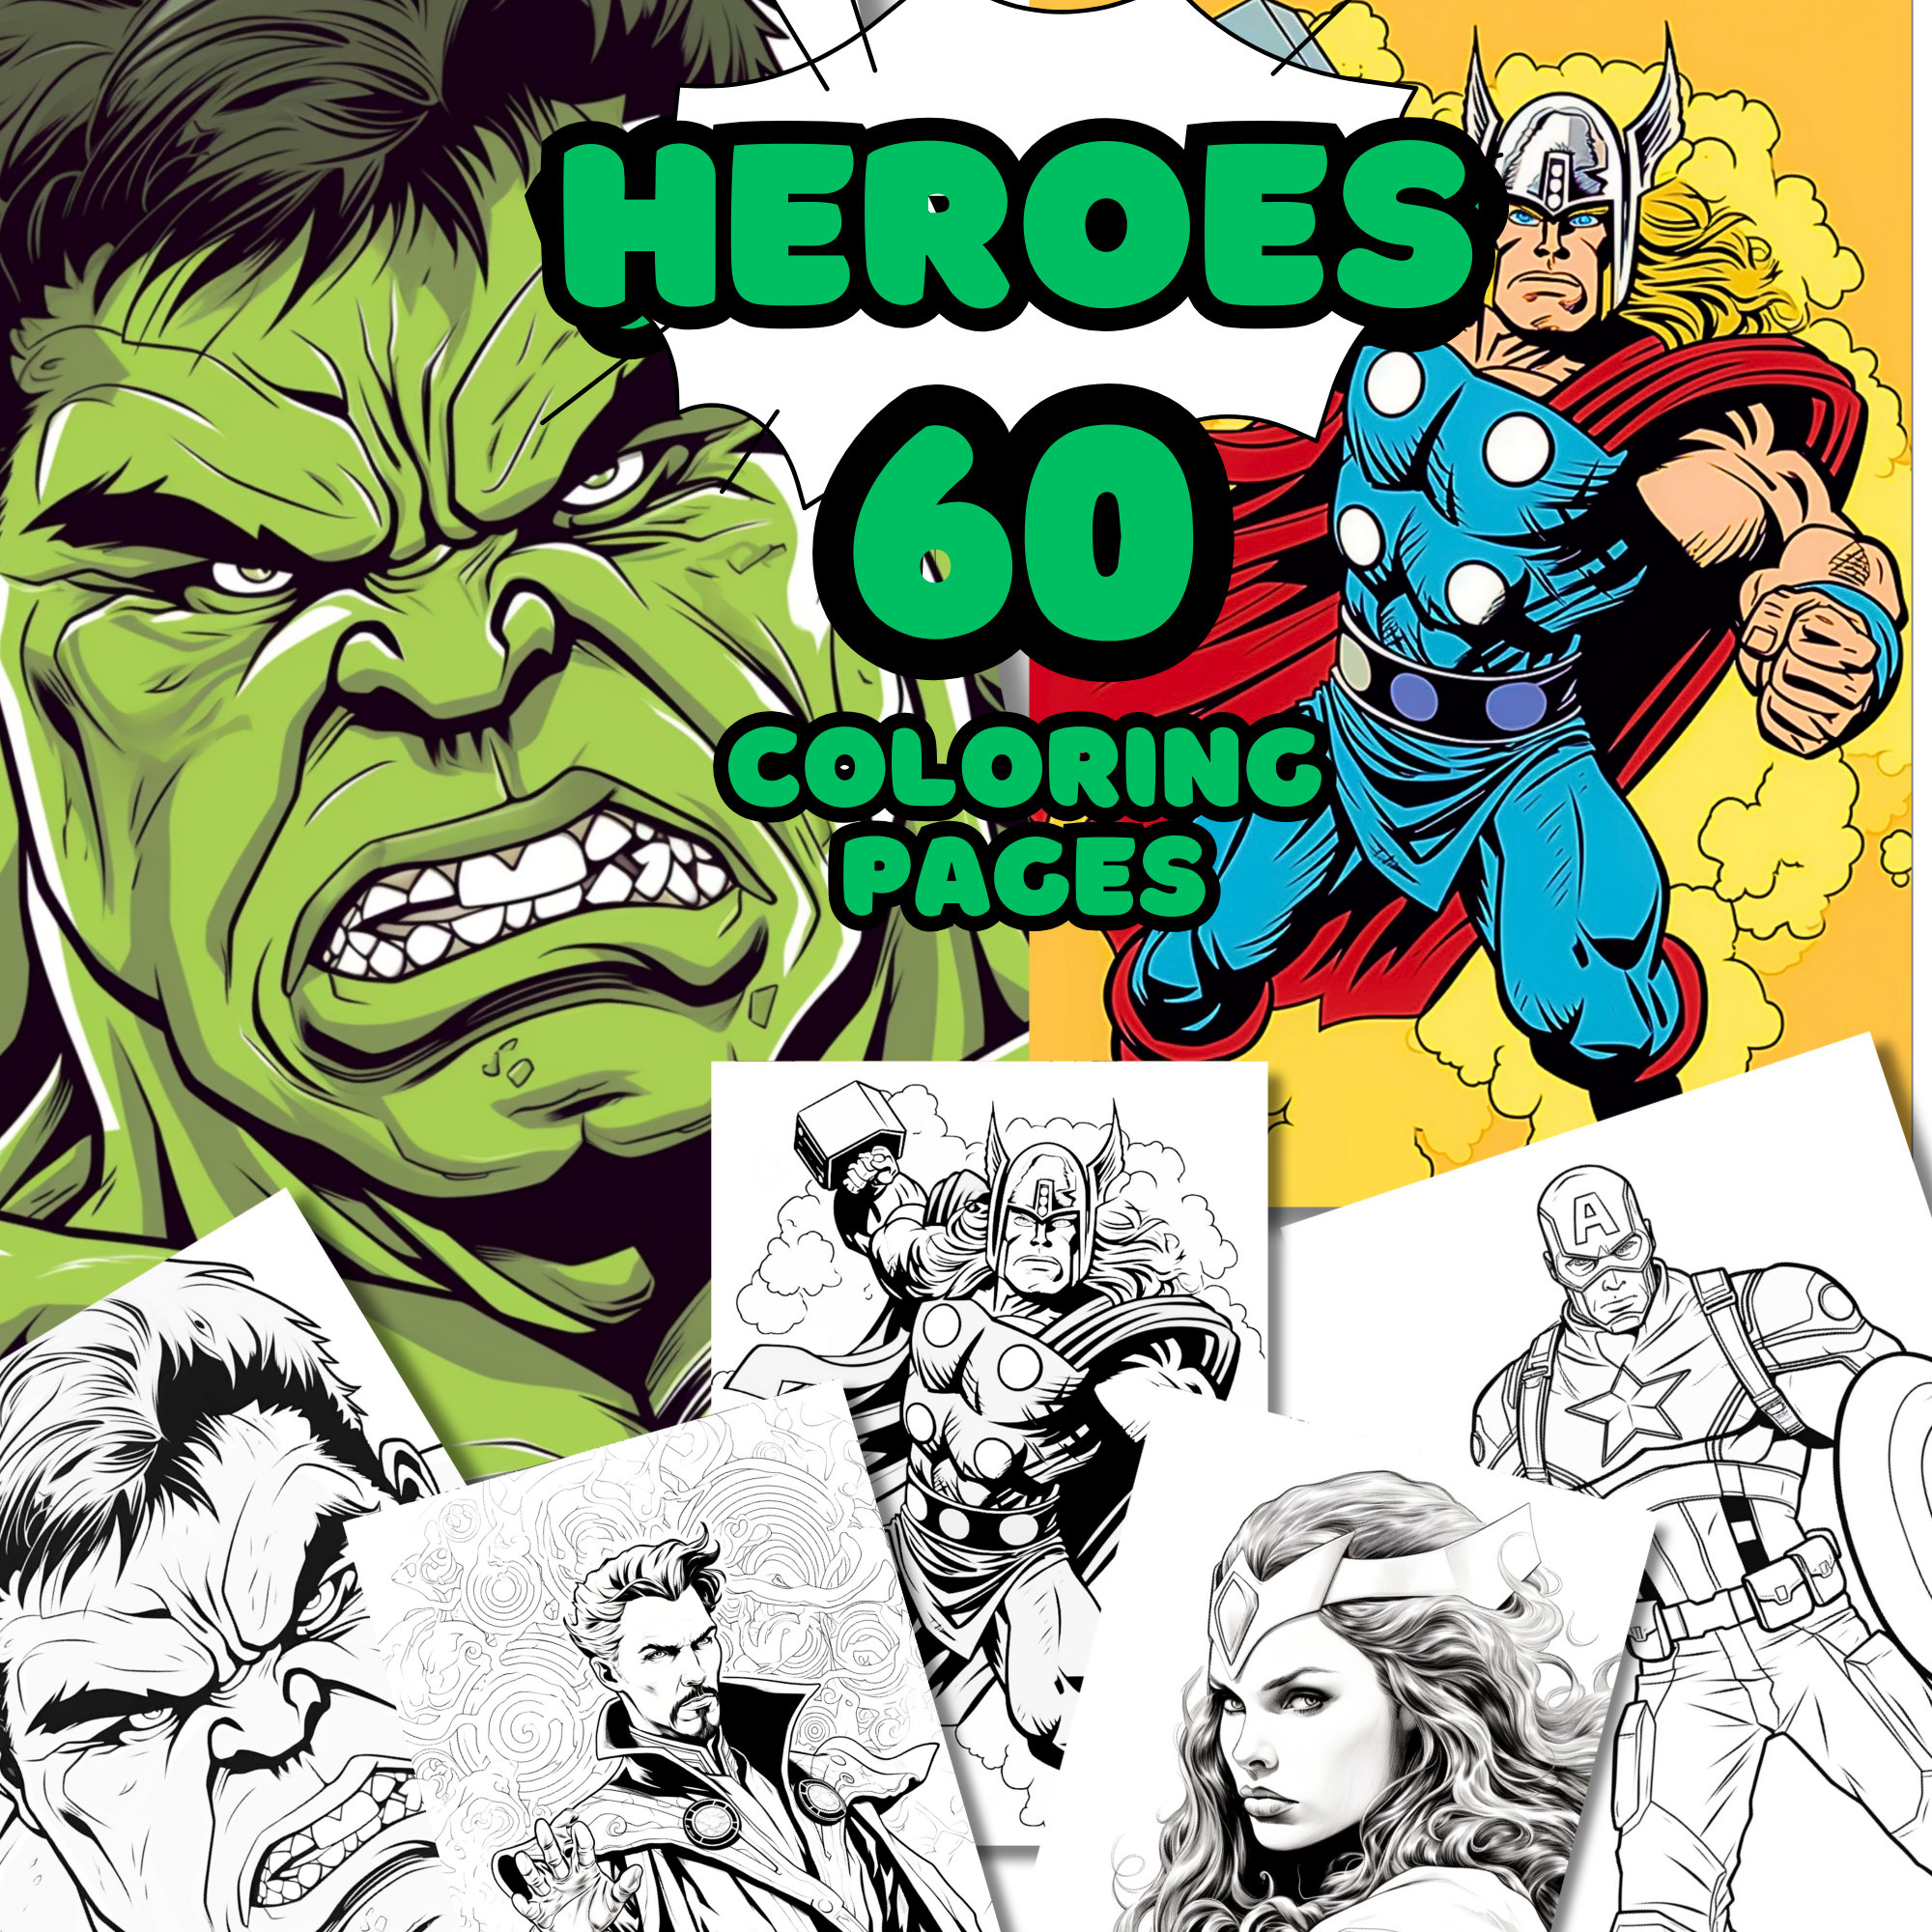 Lot Of 8 Avengers Coloring Activity Books With Stickers Marvel NEW – The  Odd Assortment